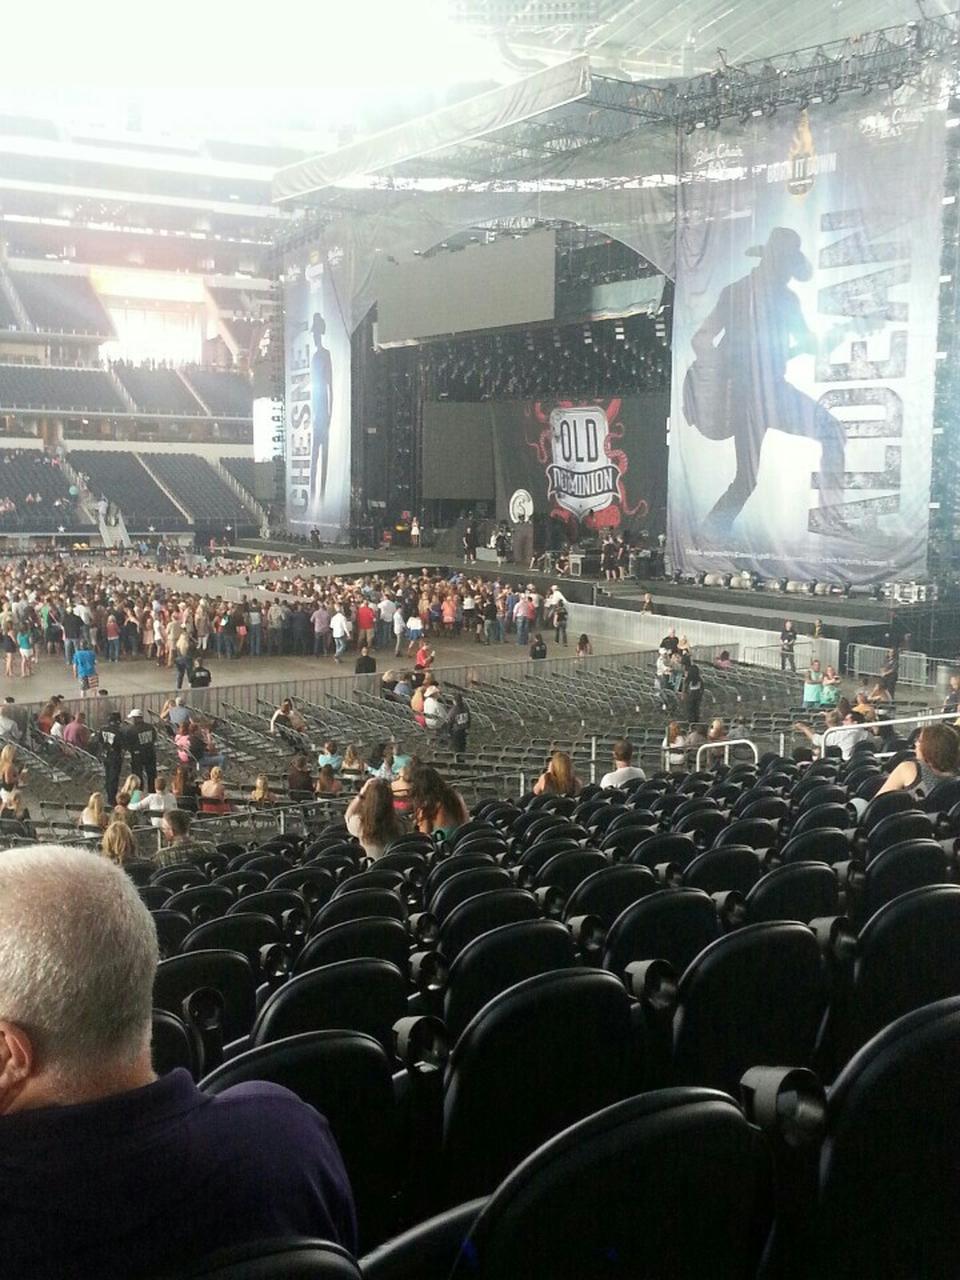 section c110, row 14 seat view  for concert - at&t stadium (cowboys stadium)